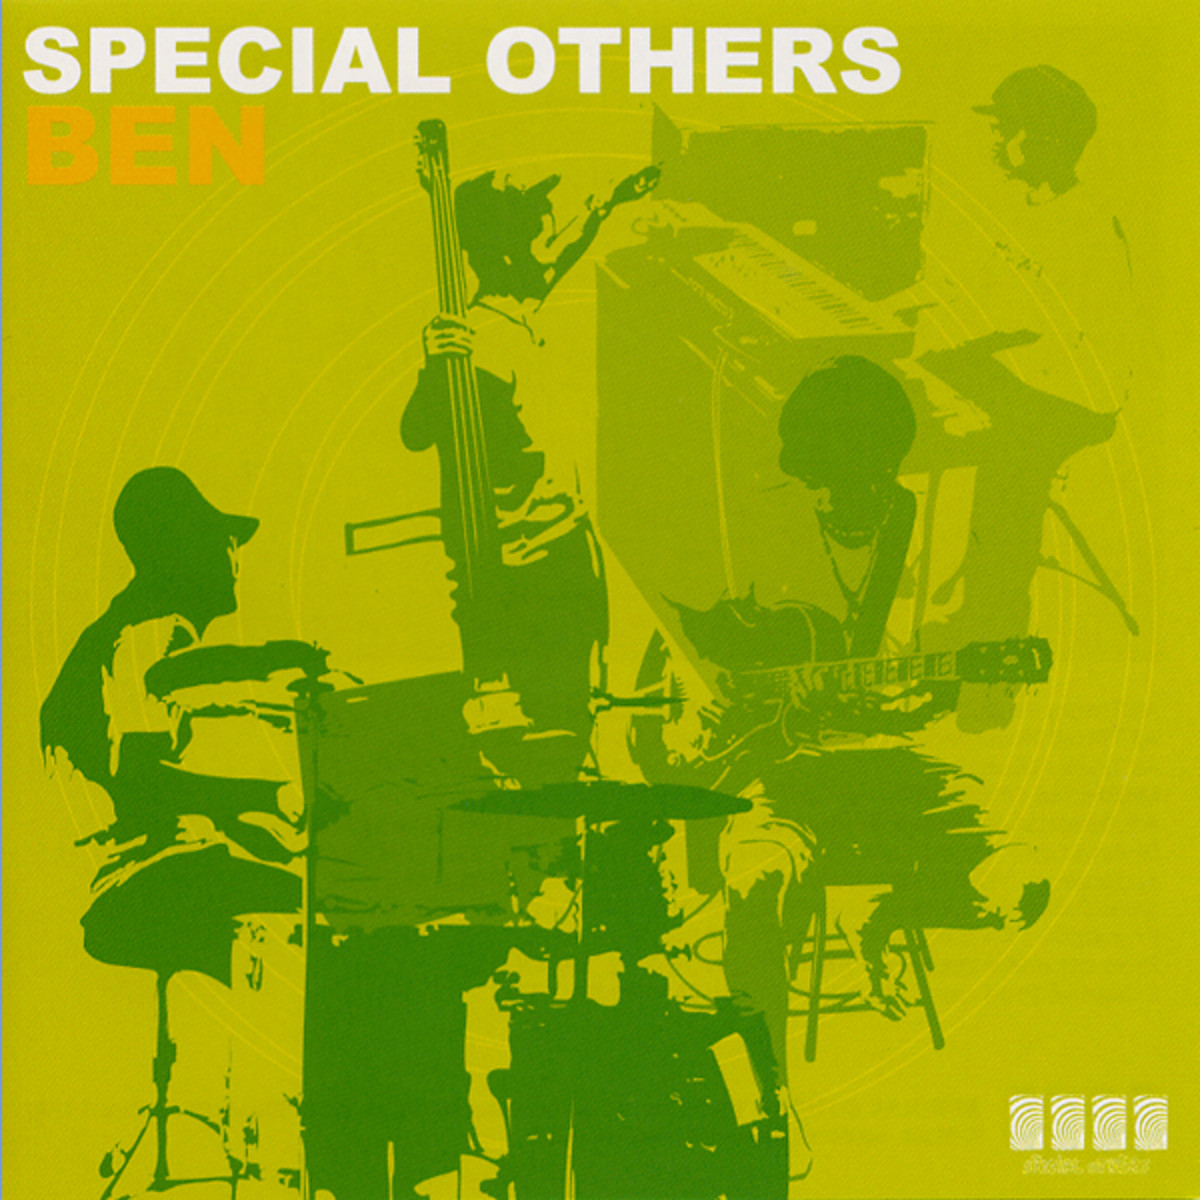 SPECIAL OTHERS official site